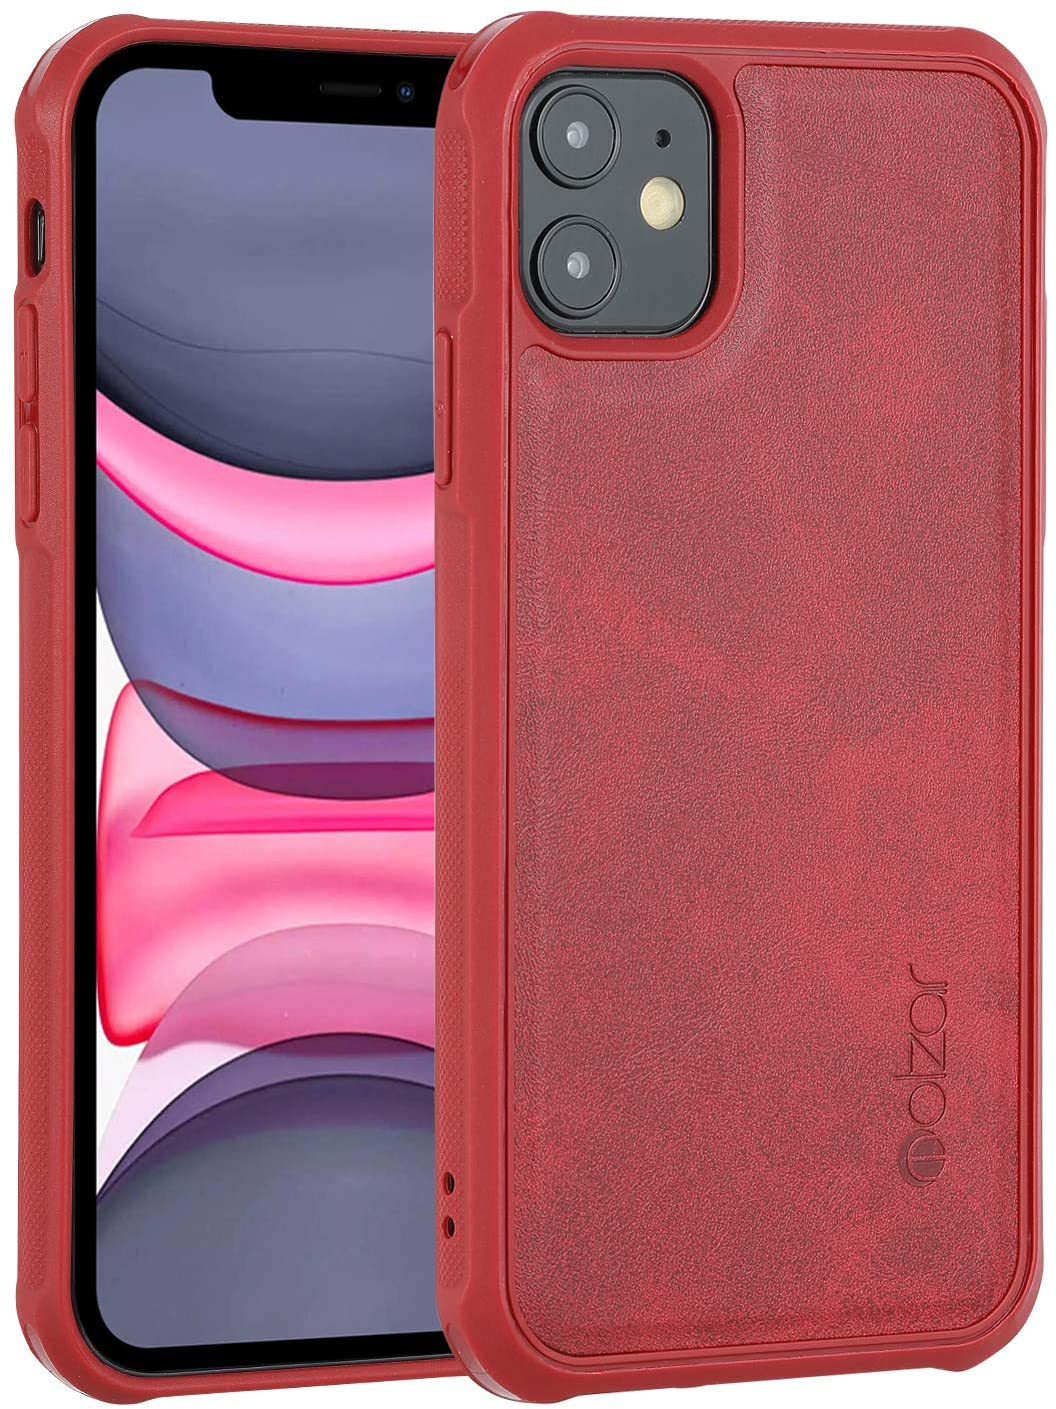 Molzar MagBig Series for iPhone 11 with Faux Leather Case - Molzar-iphone cases and accessories